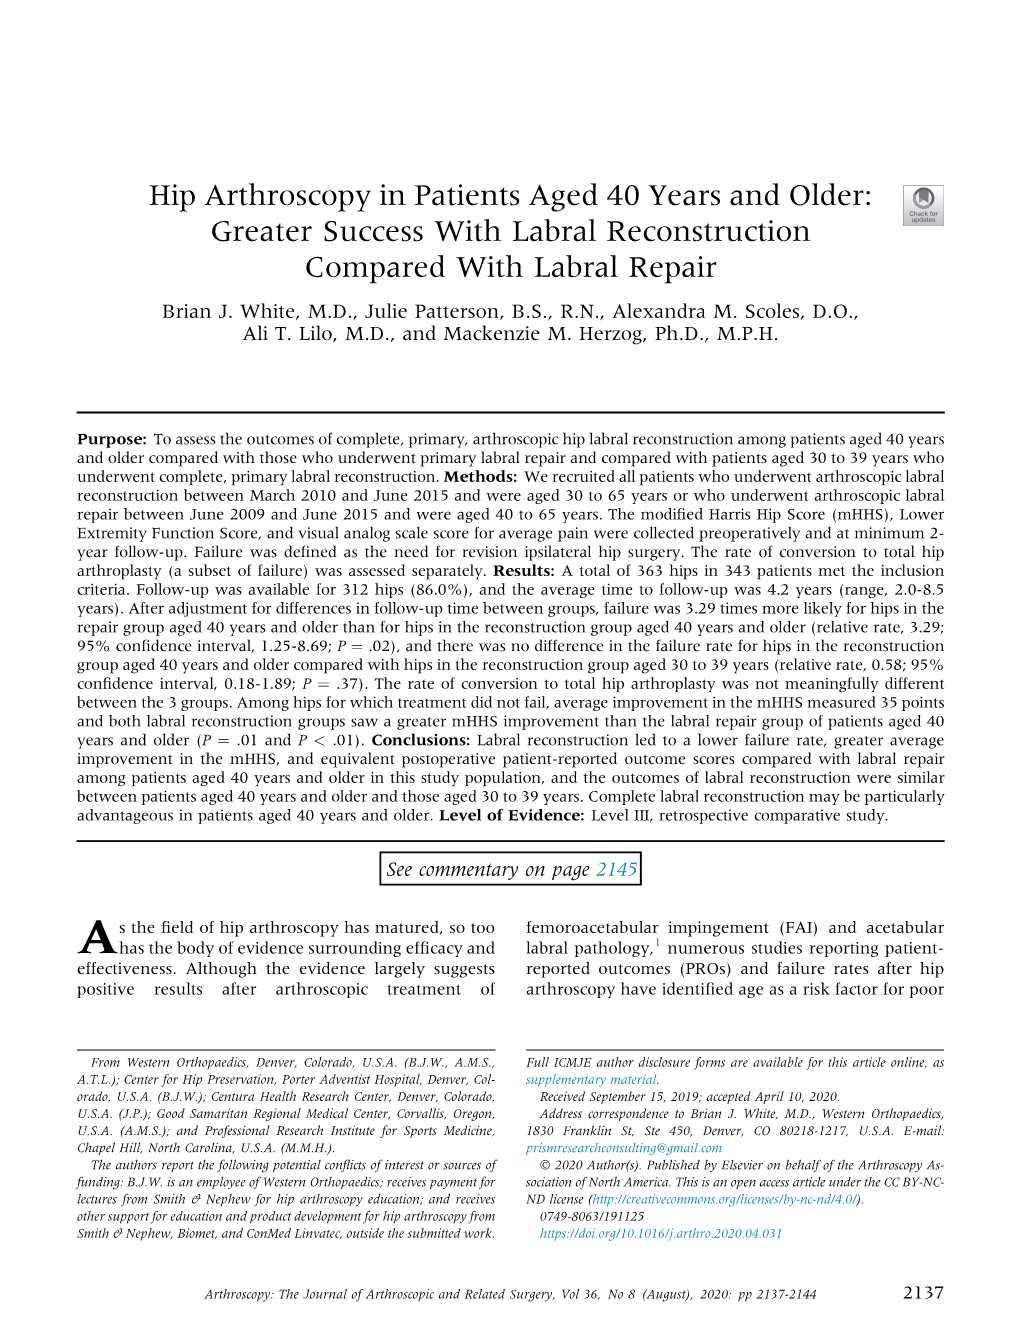 Hip Arthroscopy in Patients Aged 40 Years and Older: Greater Success with Labral Reconstruction Compared with Labral Repair Brian J